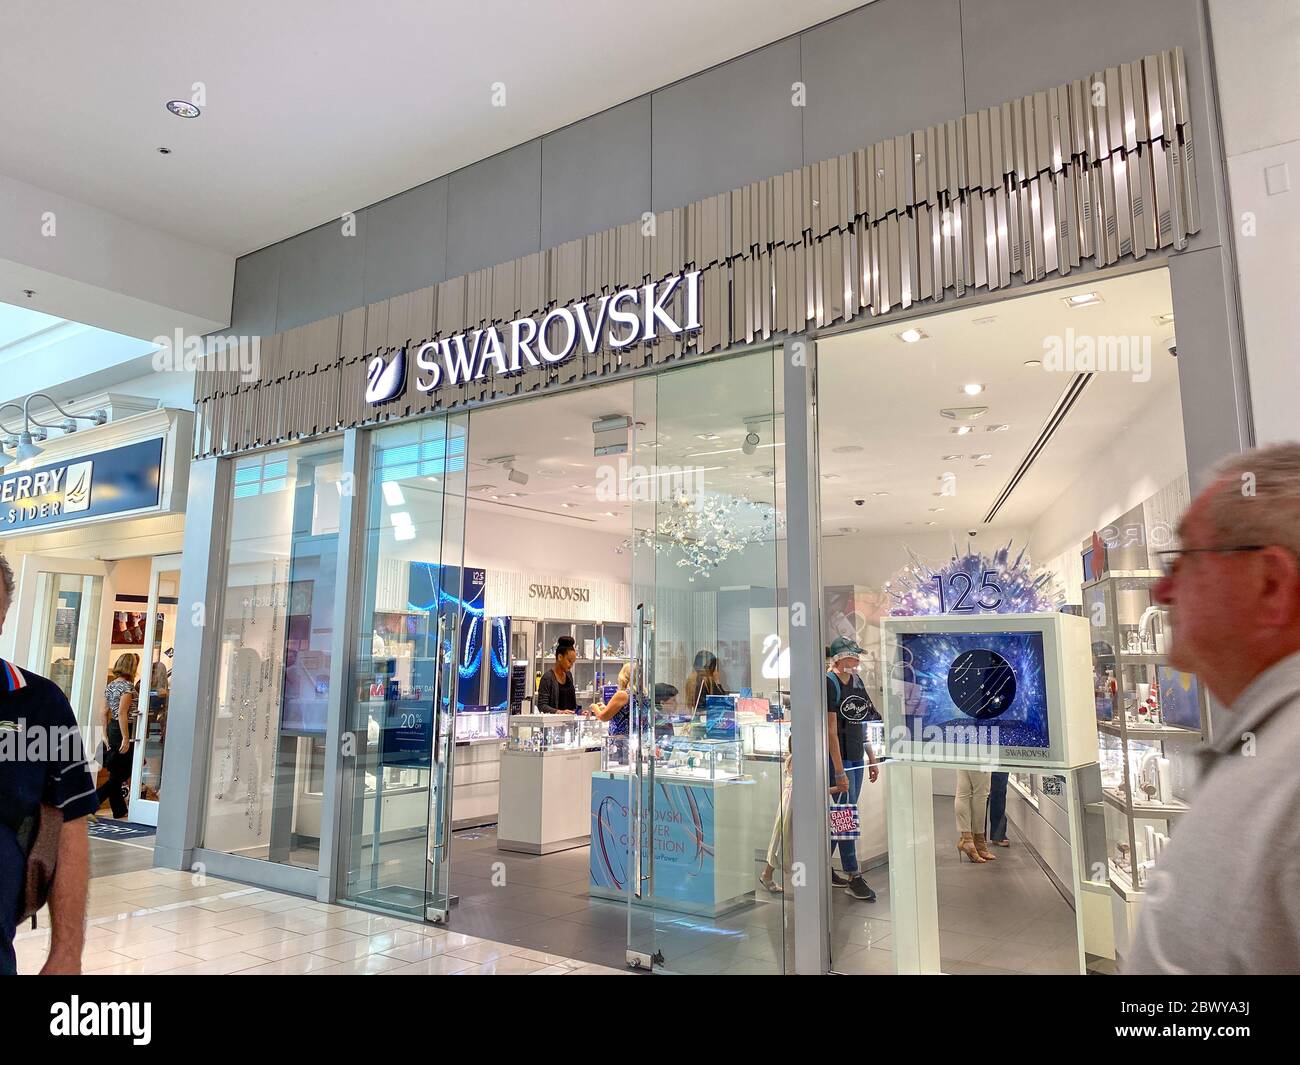 Swarovski Jewelry Store High Resolution Stock Photography and Images - Alamy